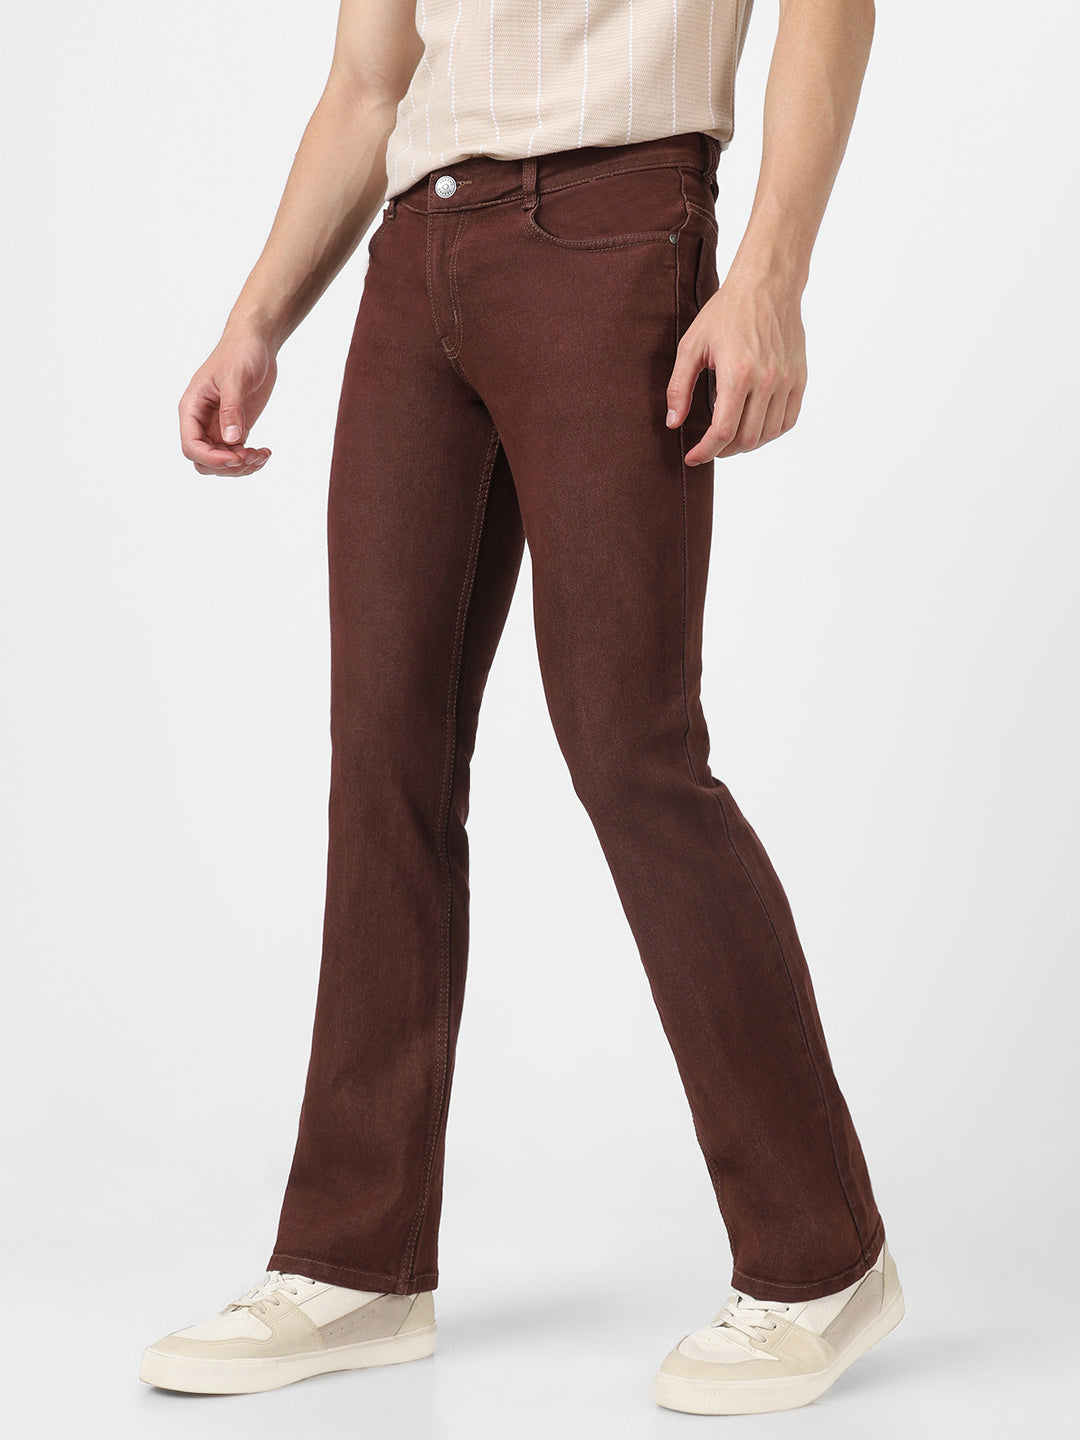 Men's Brown Washed Bootcut Jeans Stretchable